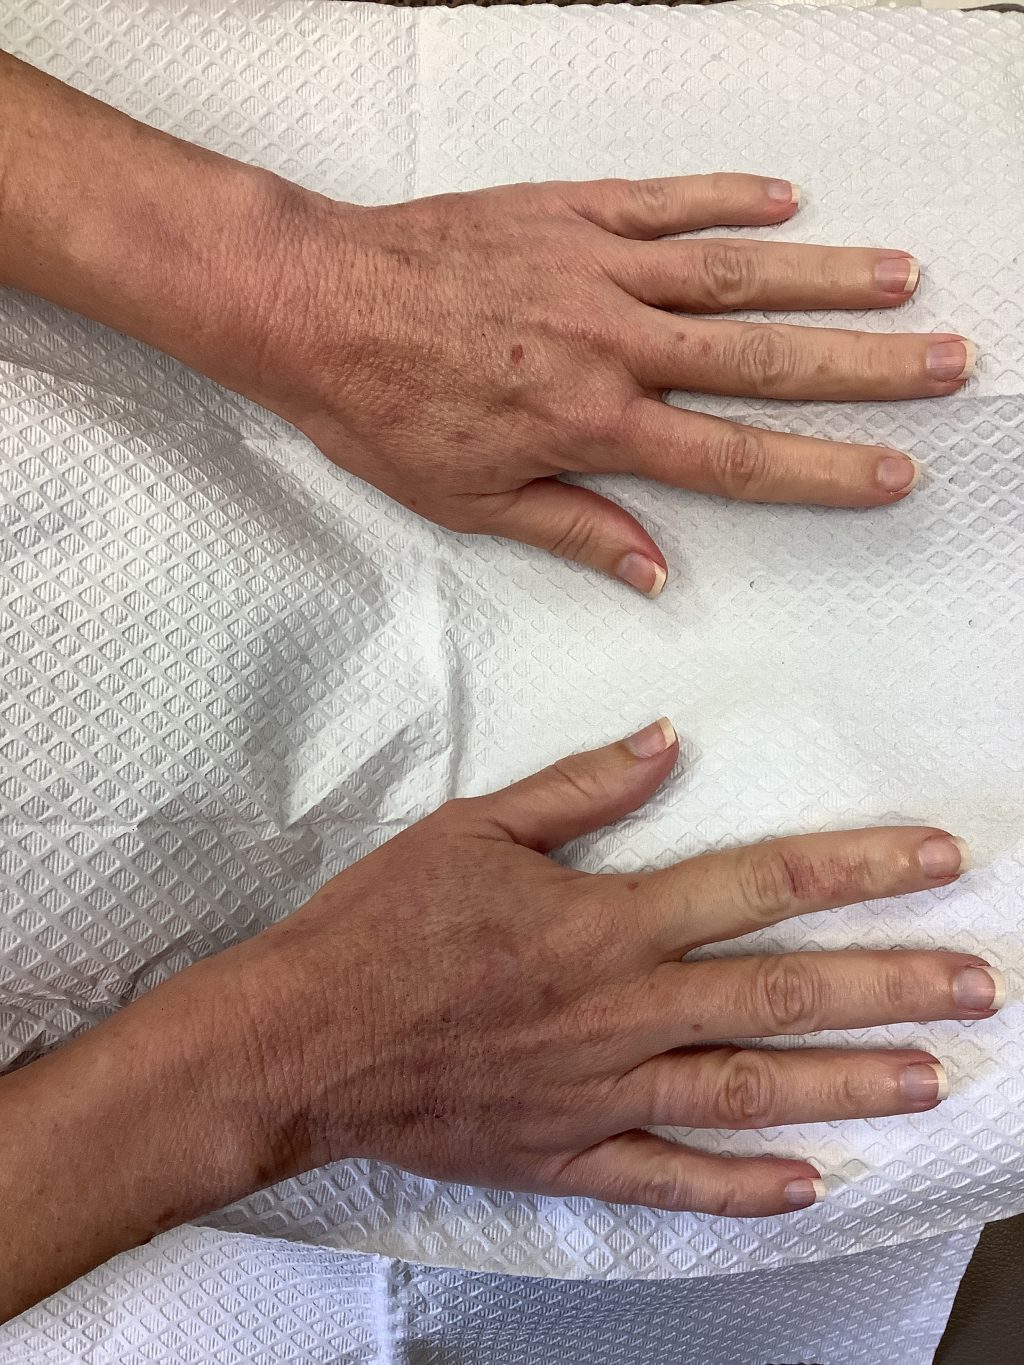 Lisa's hands before receiving laser treatments and Radiesse filler at LJC. Visibly aged in appearance from sun damage, exposed veins.